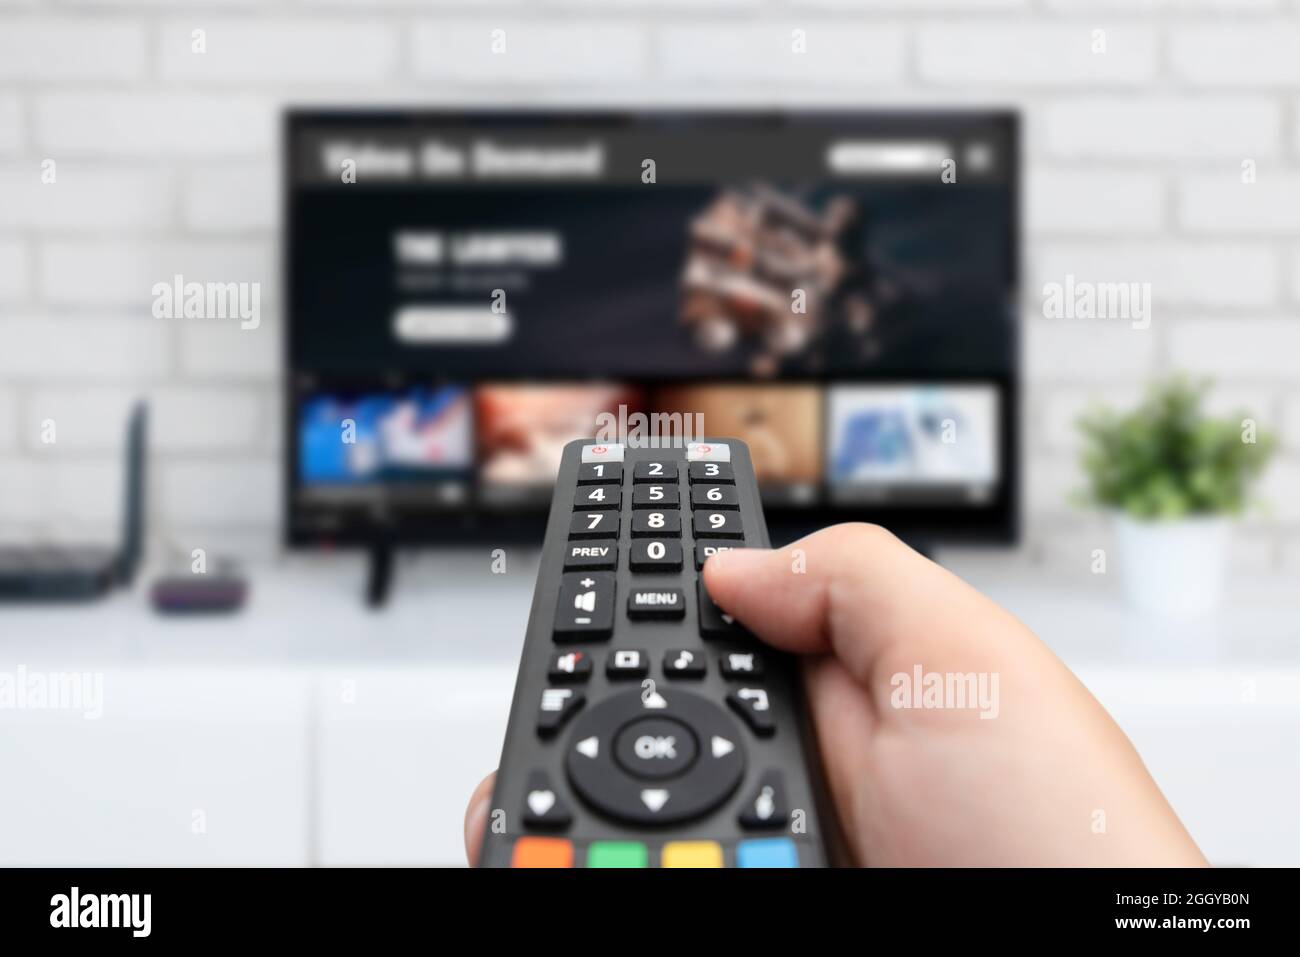 Man watching TV, remote control in hand. VOD service on TV Stock Photo